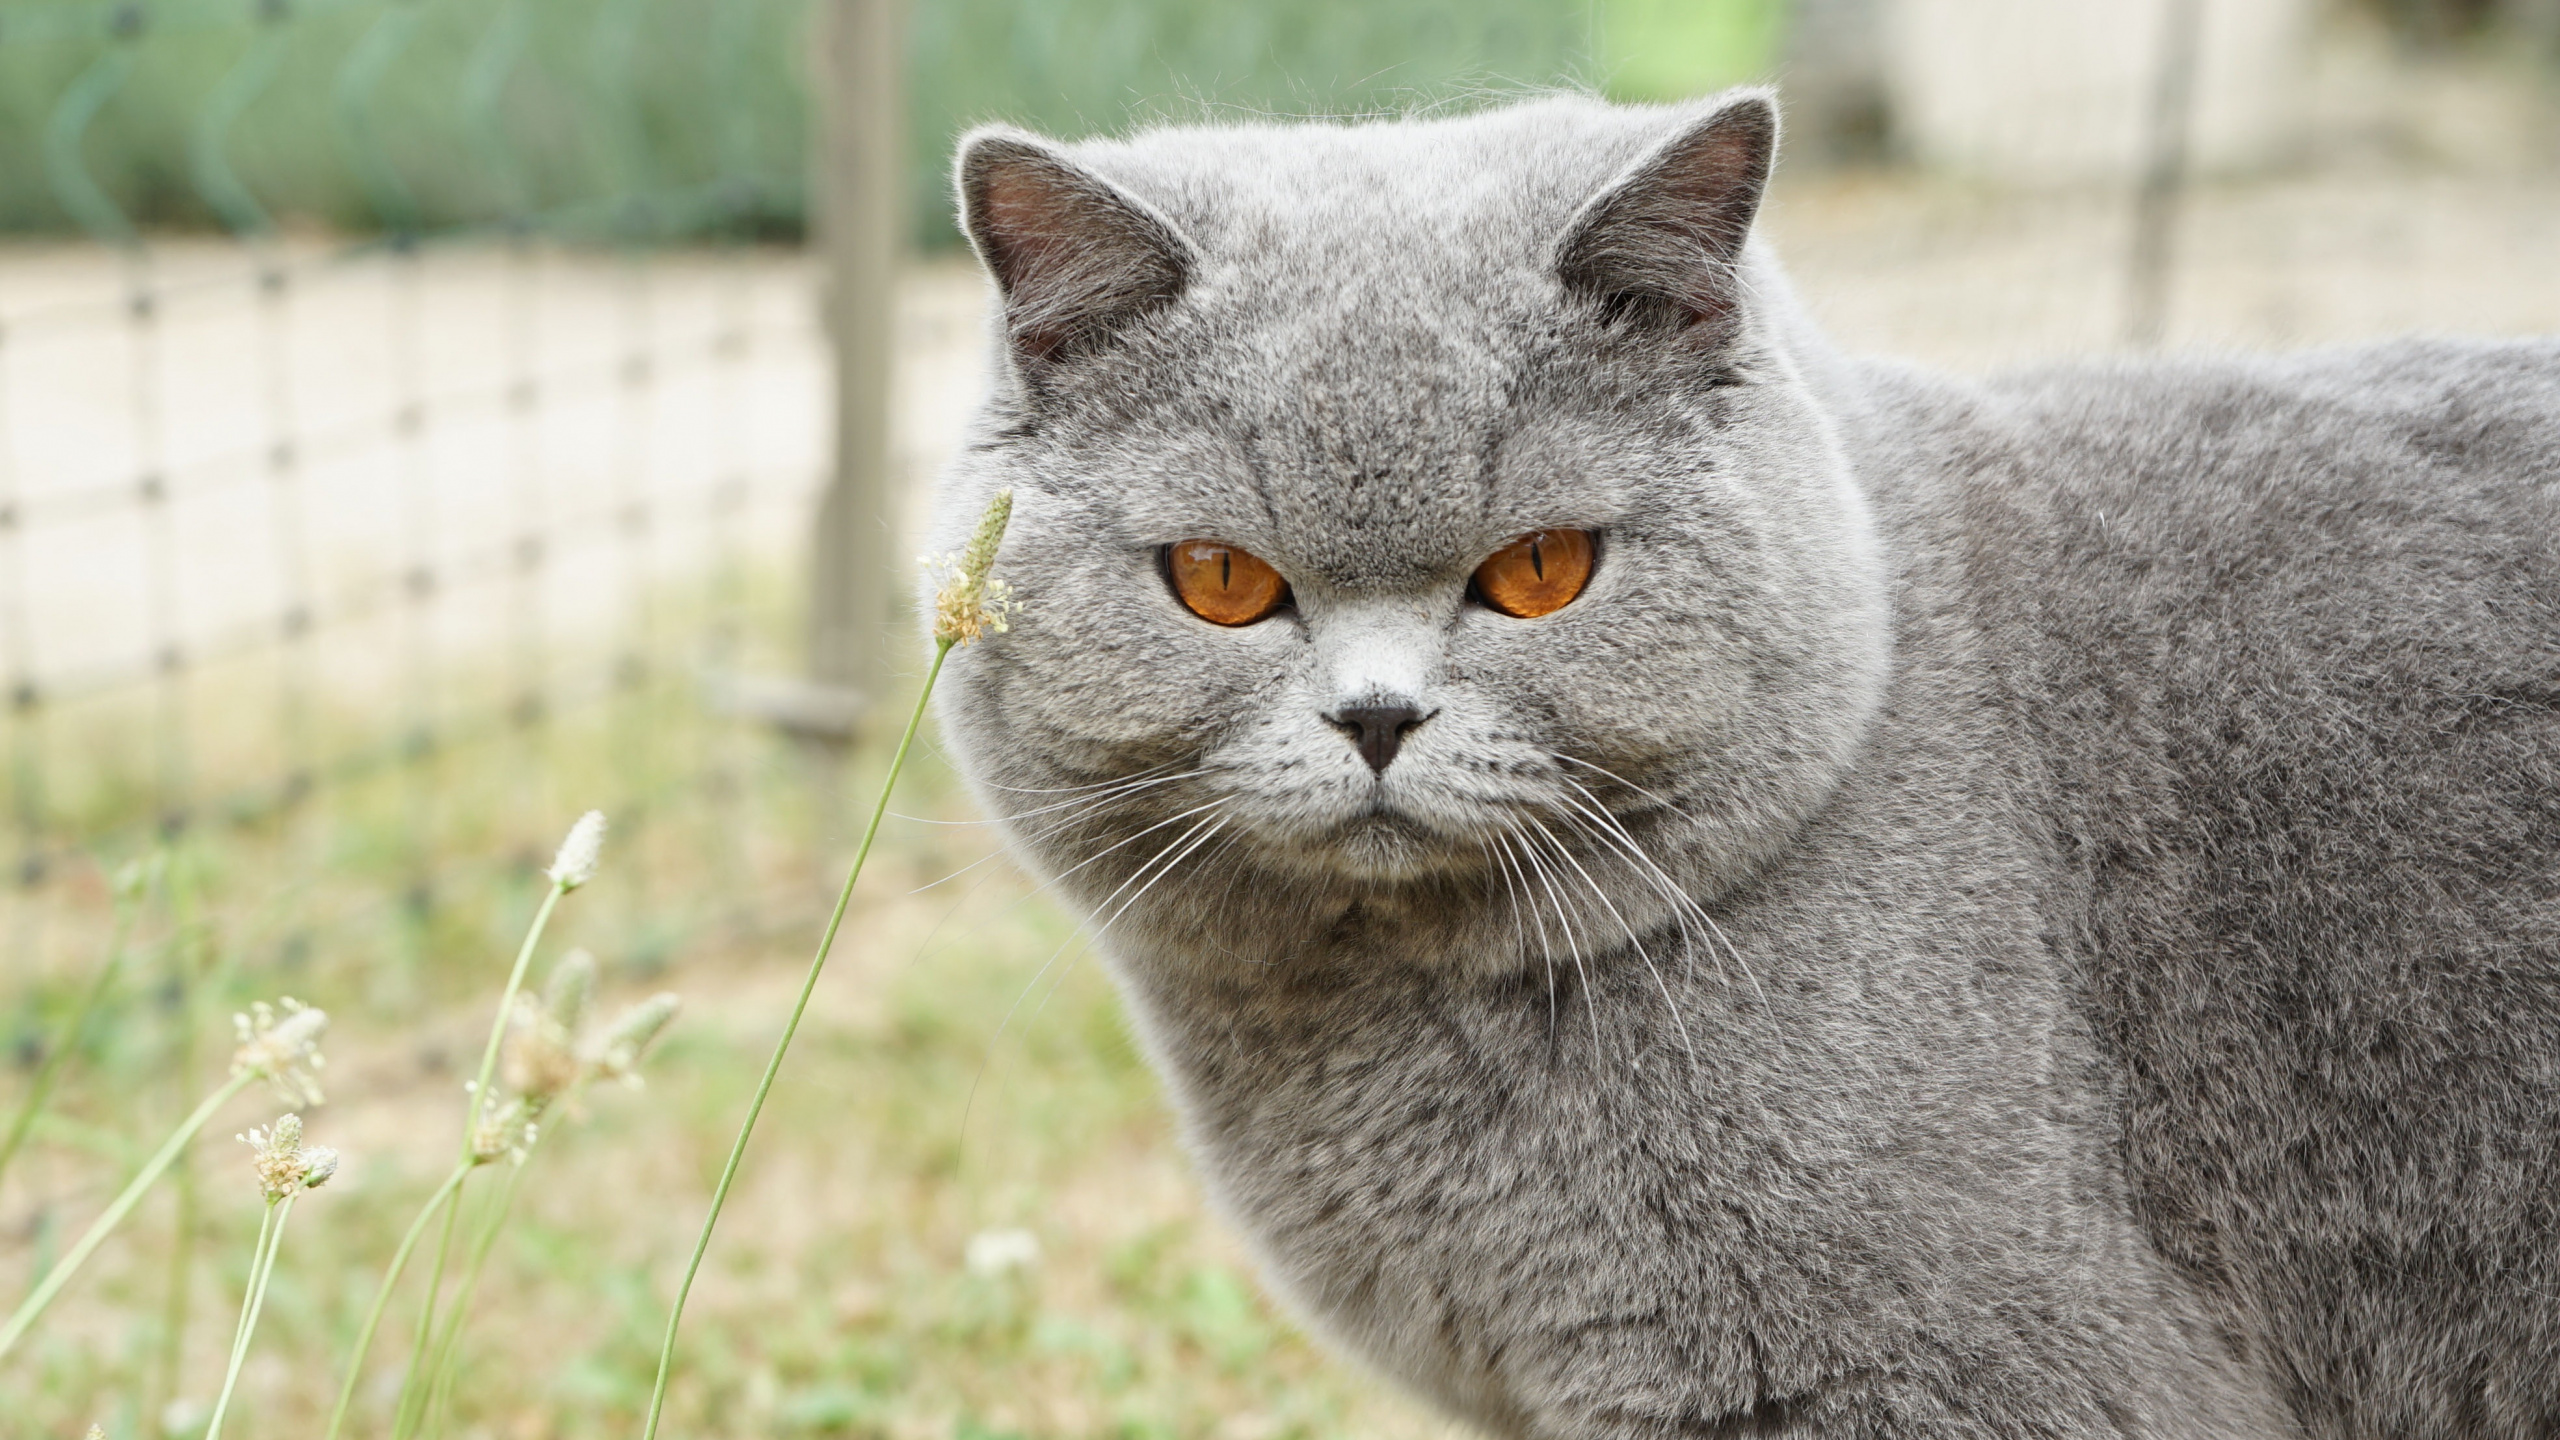 Download 2560x1440 Wallpaper Angry Cat, Muzzle, British